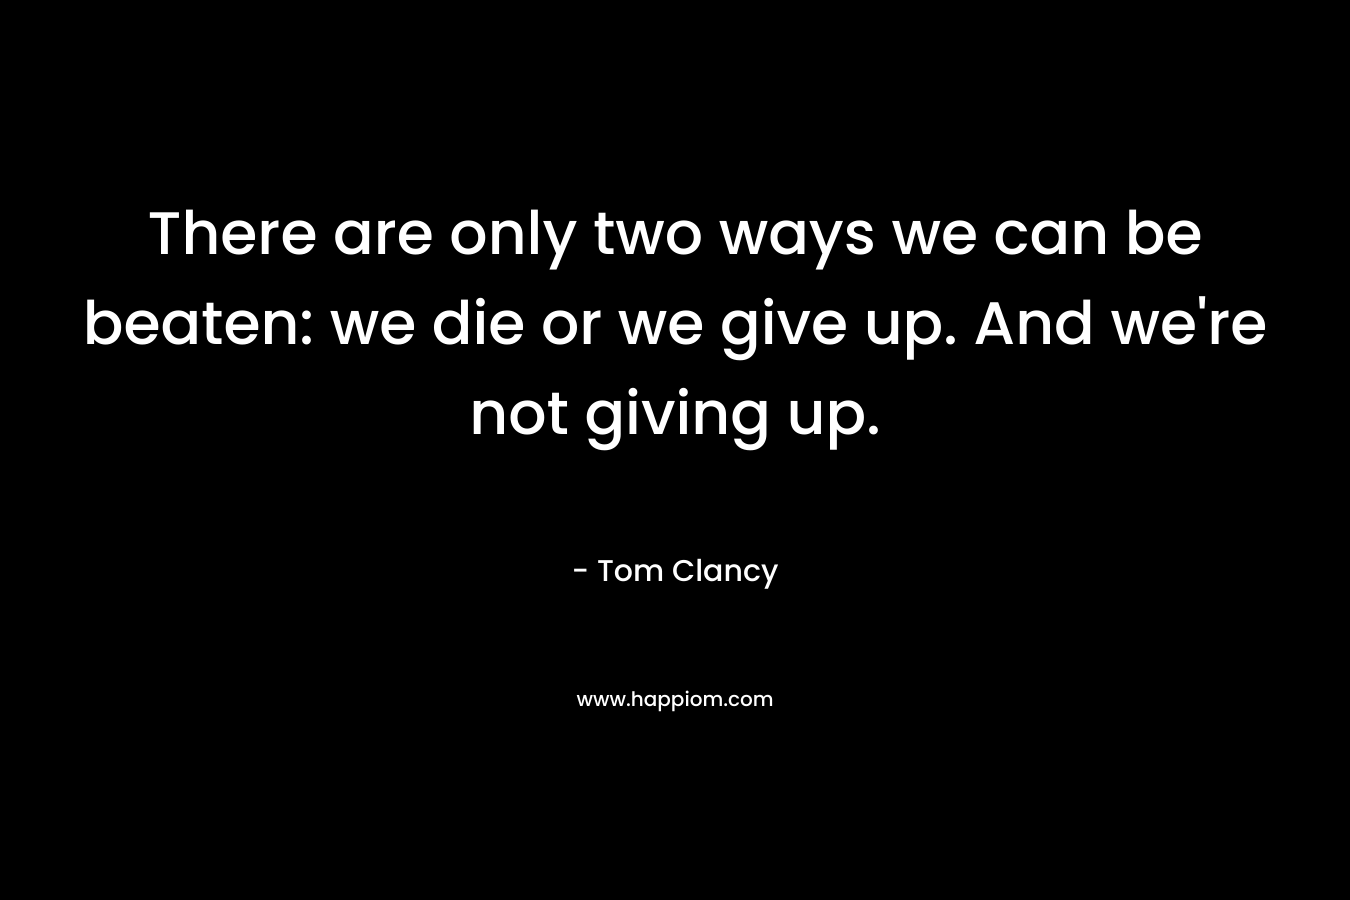 There are only two ways we can be beaten: we die or we give up. And we’re not giving up. – Tom Clancy